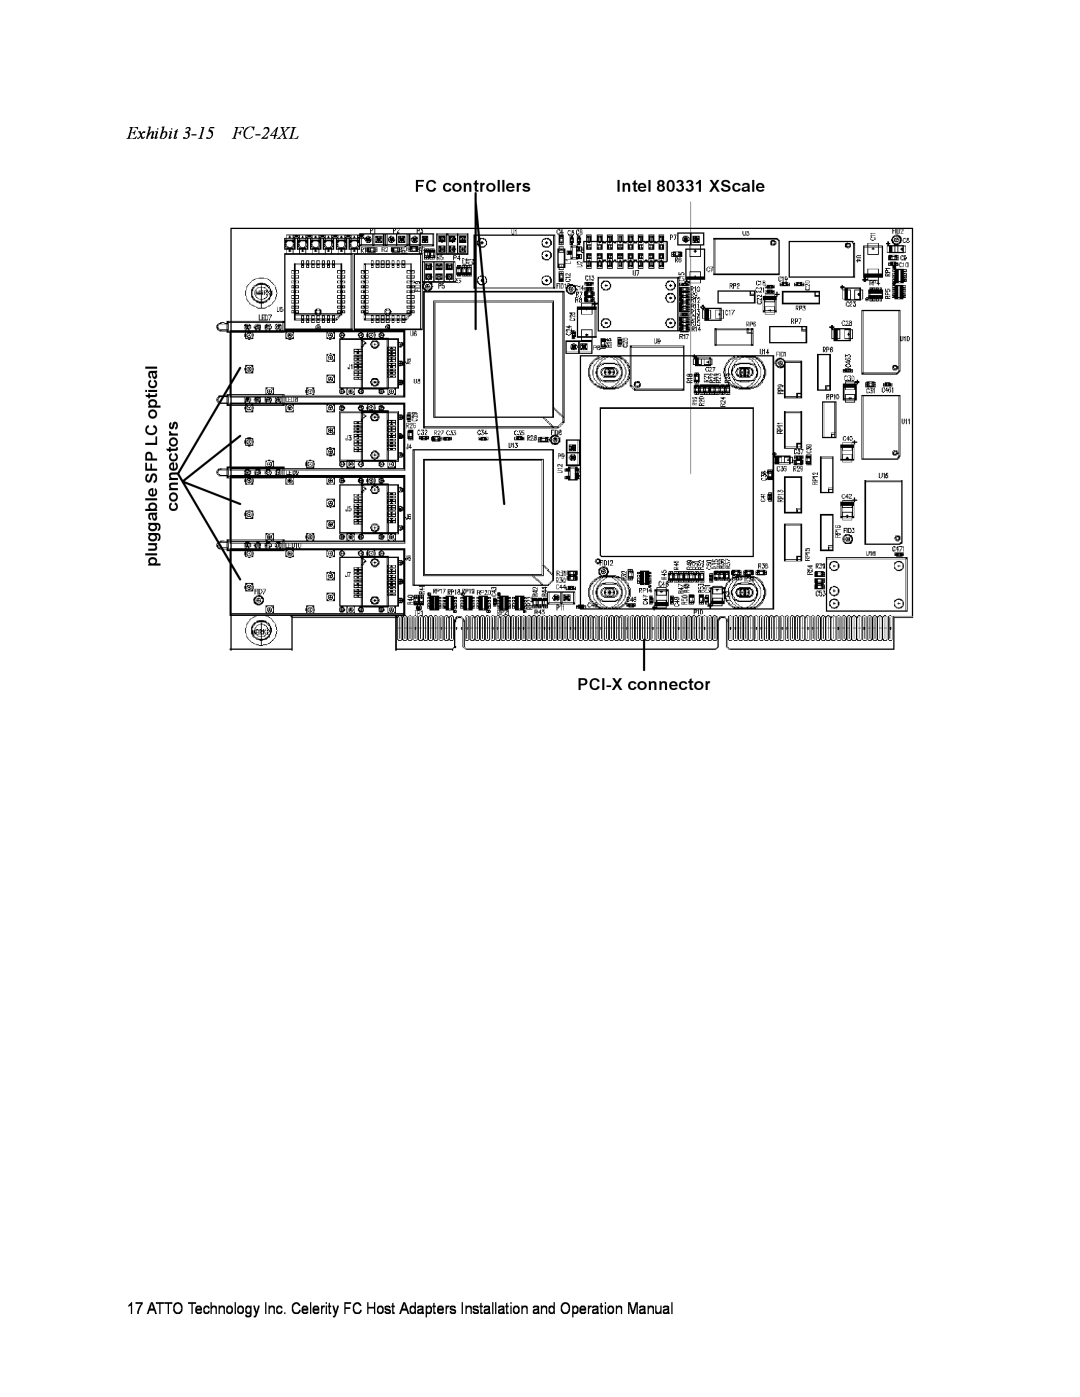 ATTO Technology FC-44ES 4-Gb operation manual Exhibit 3-15 FC-24XL, FC controllers, PCI-X connector 